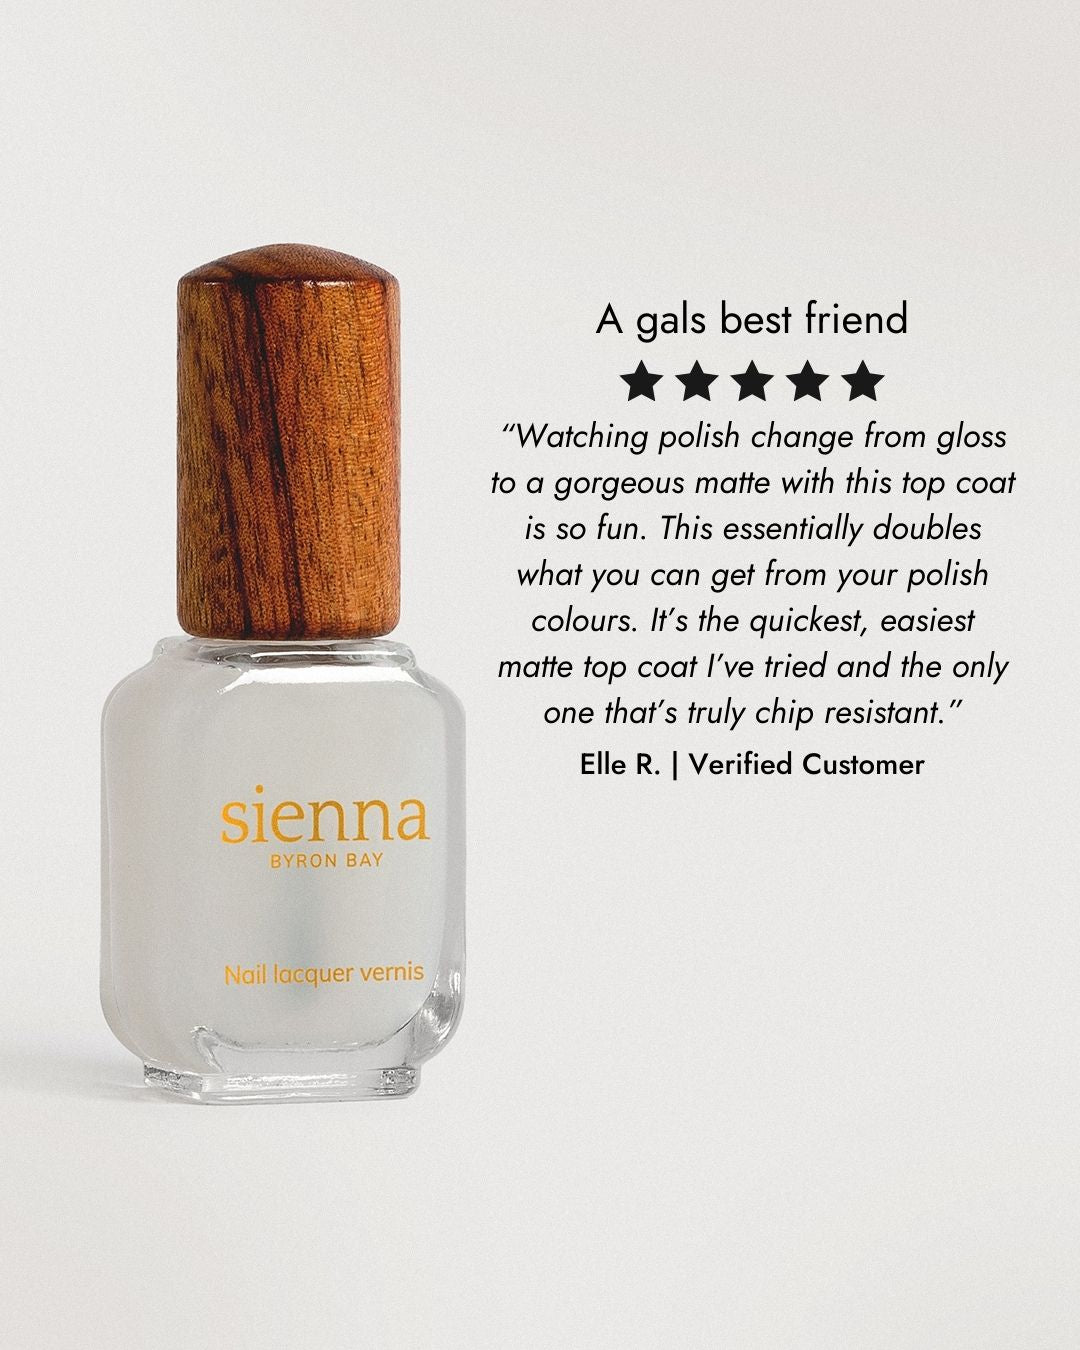 clear matte top coat nail polish glass bottle with 5 star review